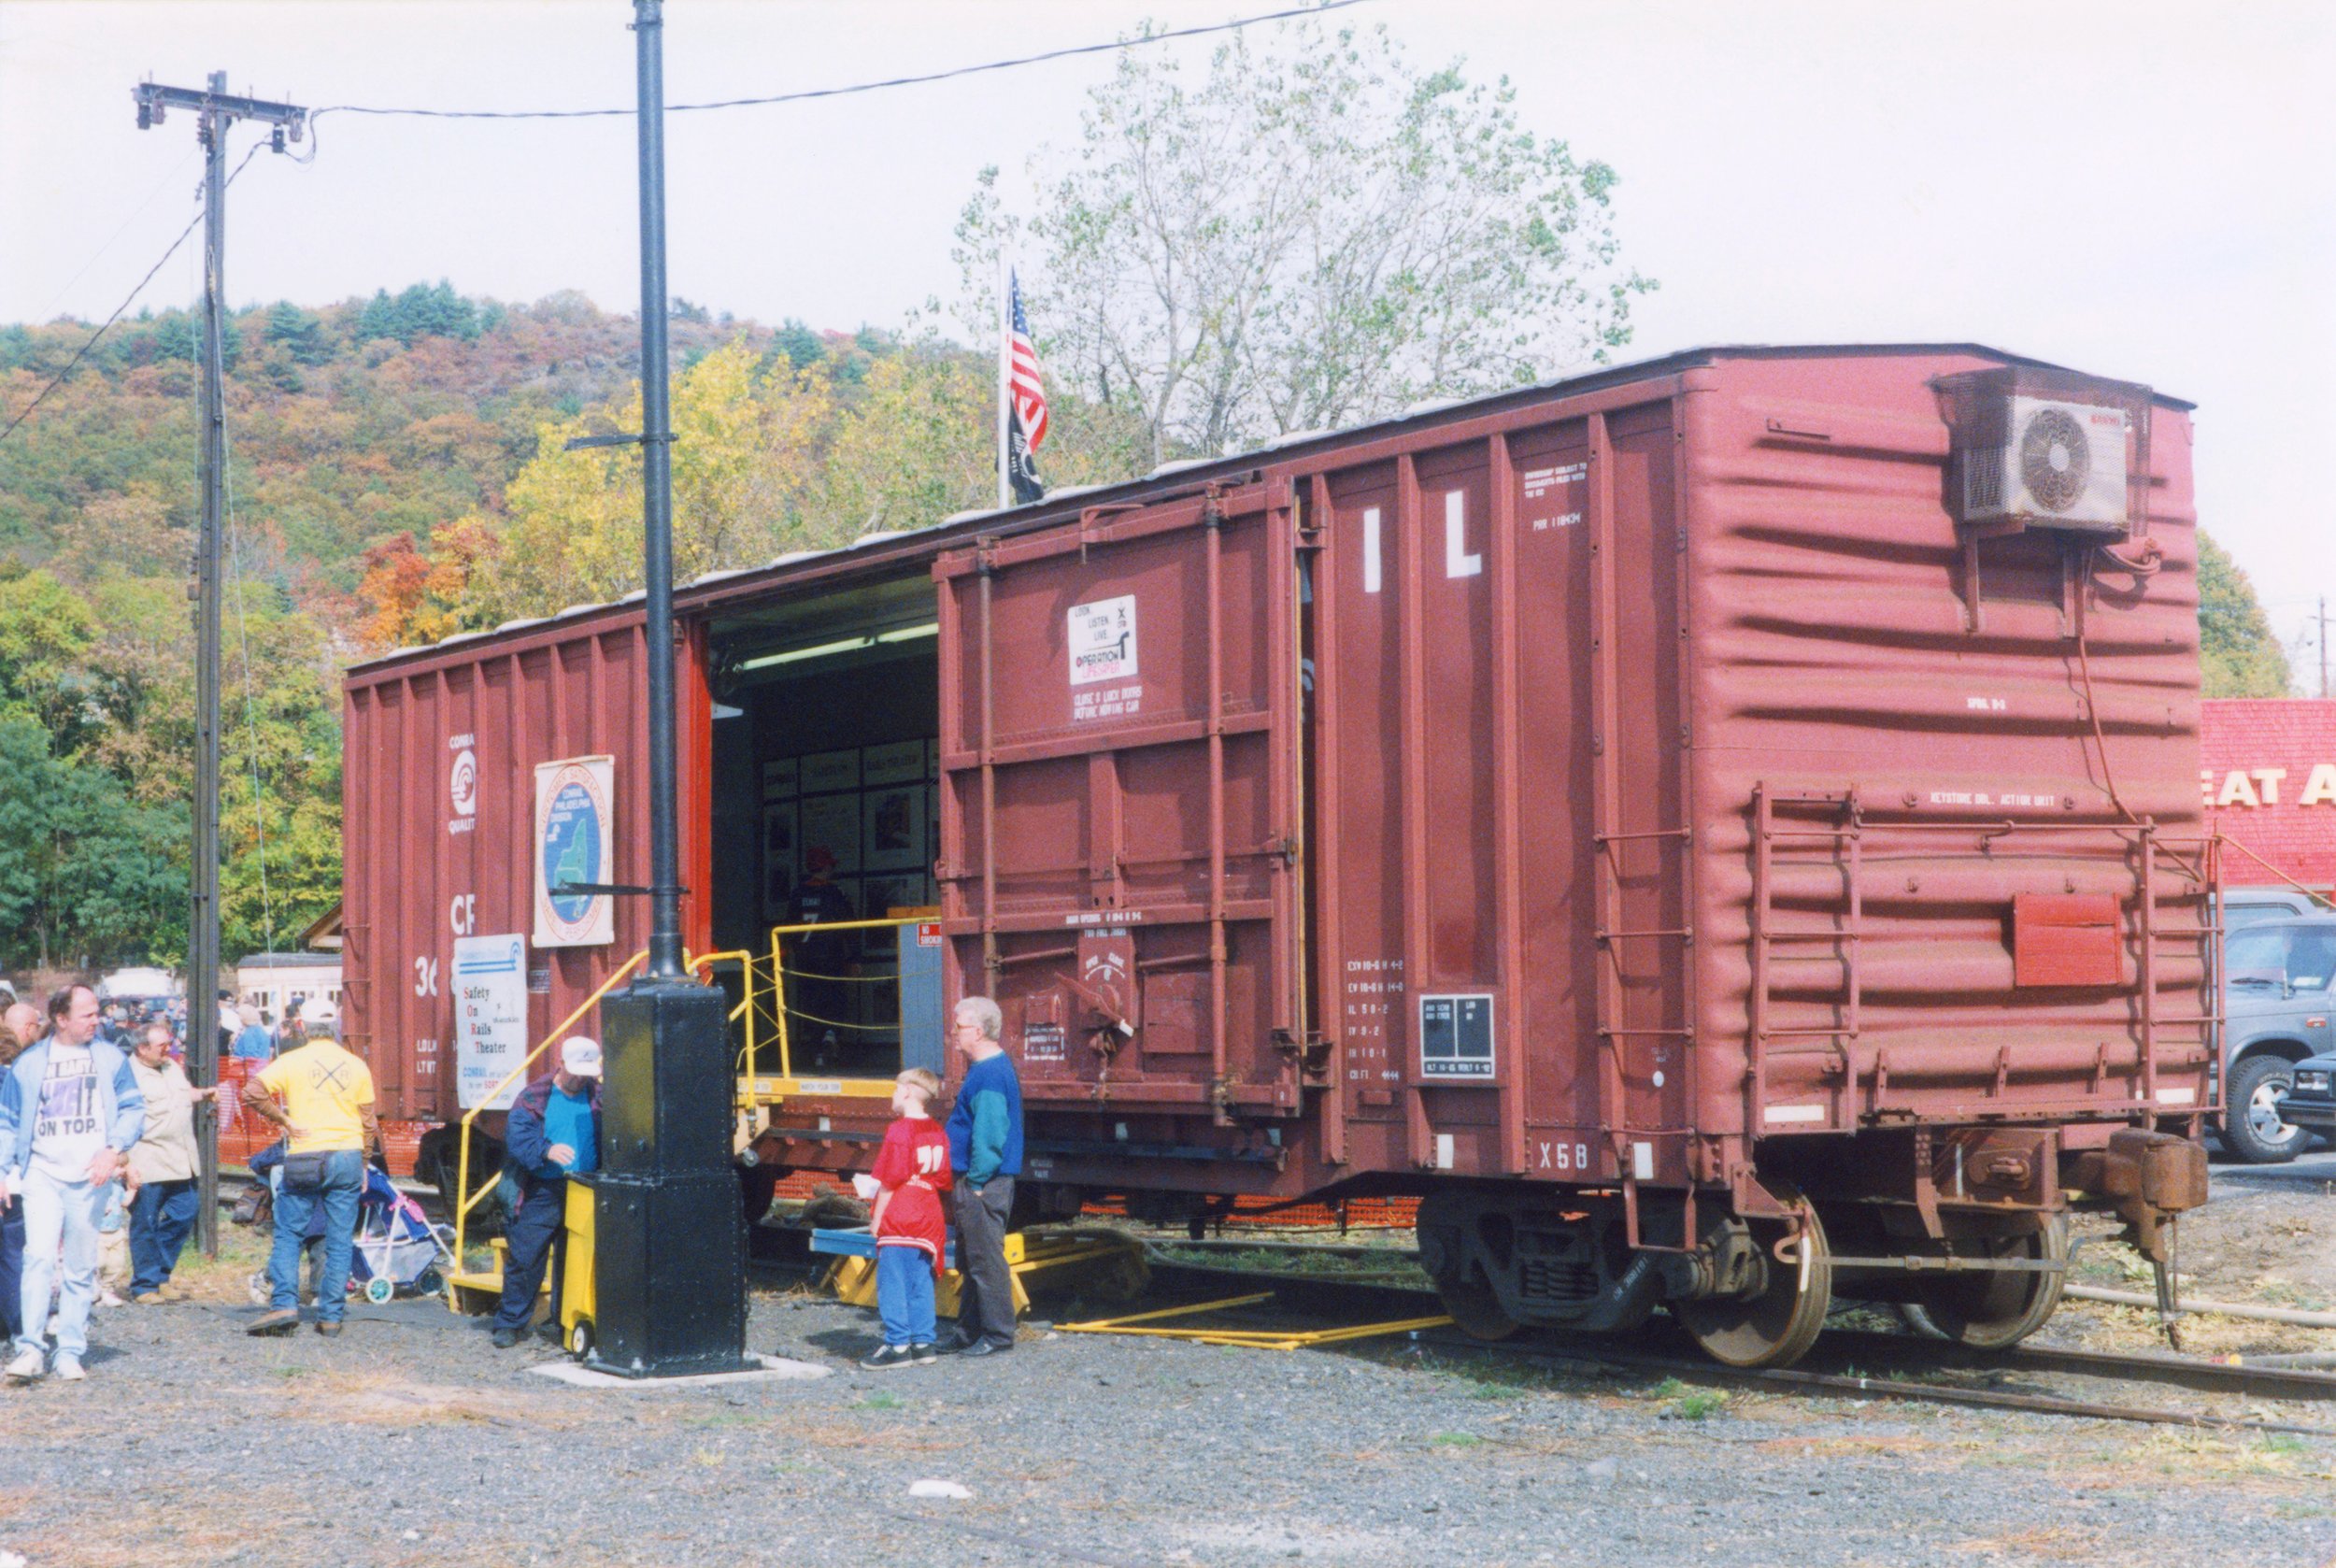   1998 in Port Jervis, NY - John Sobotka collection  